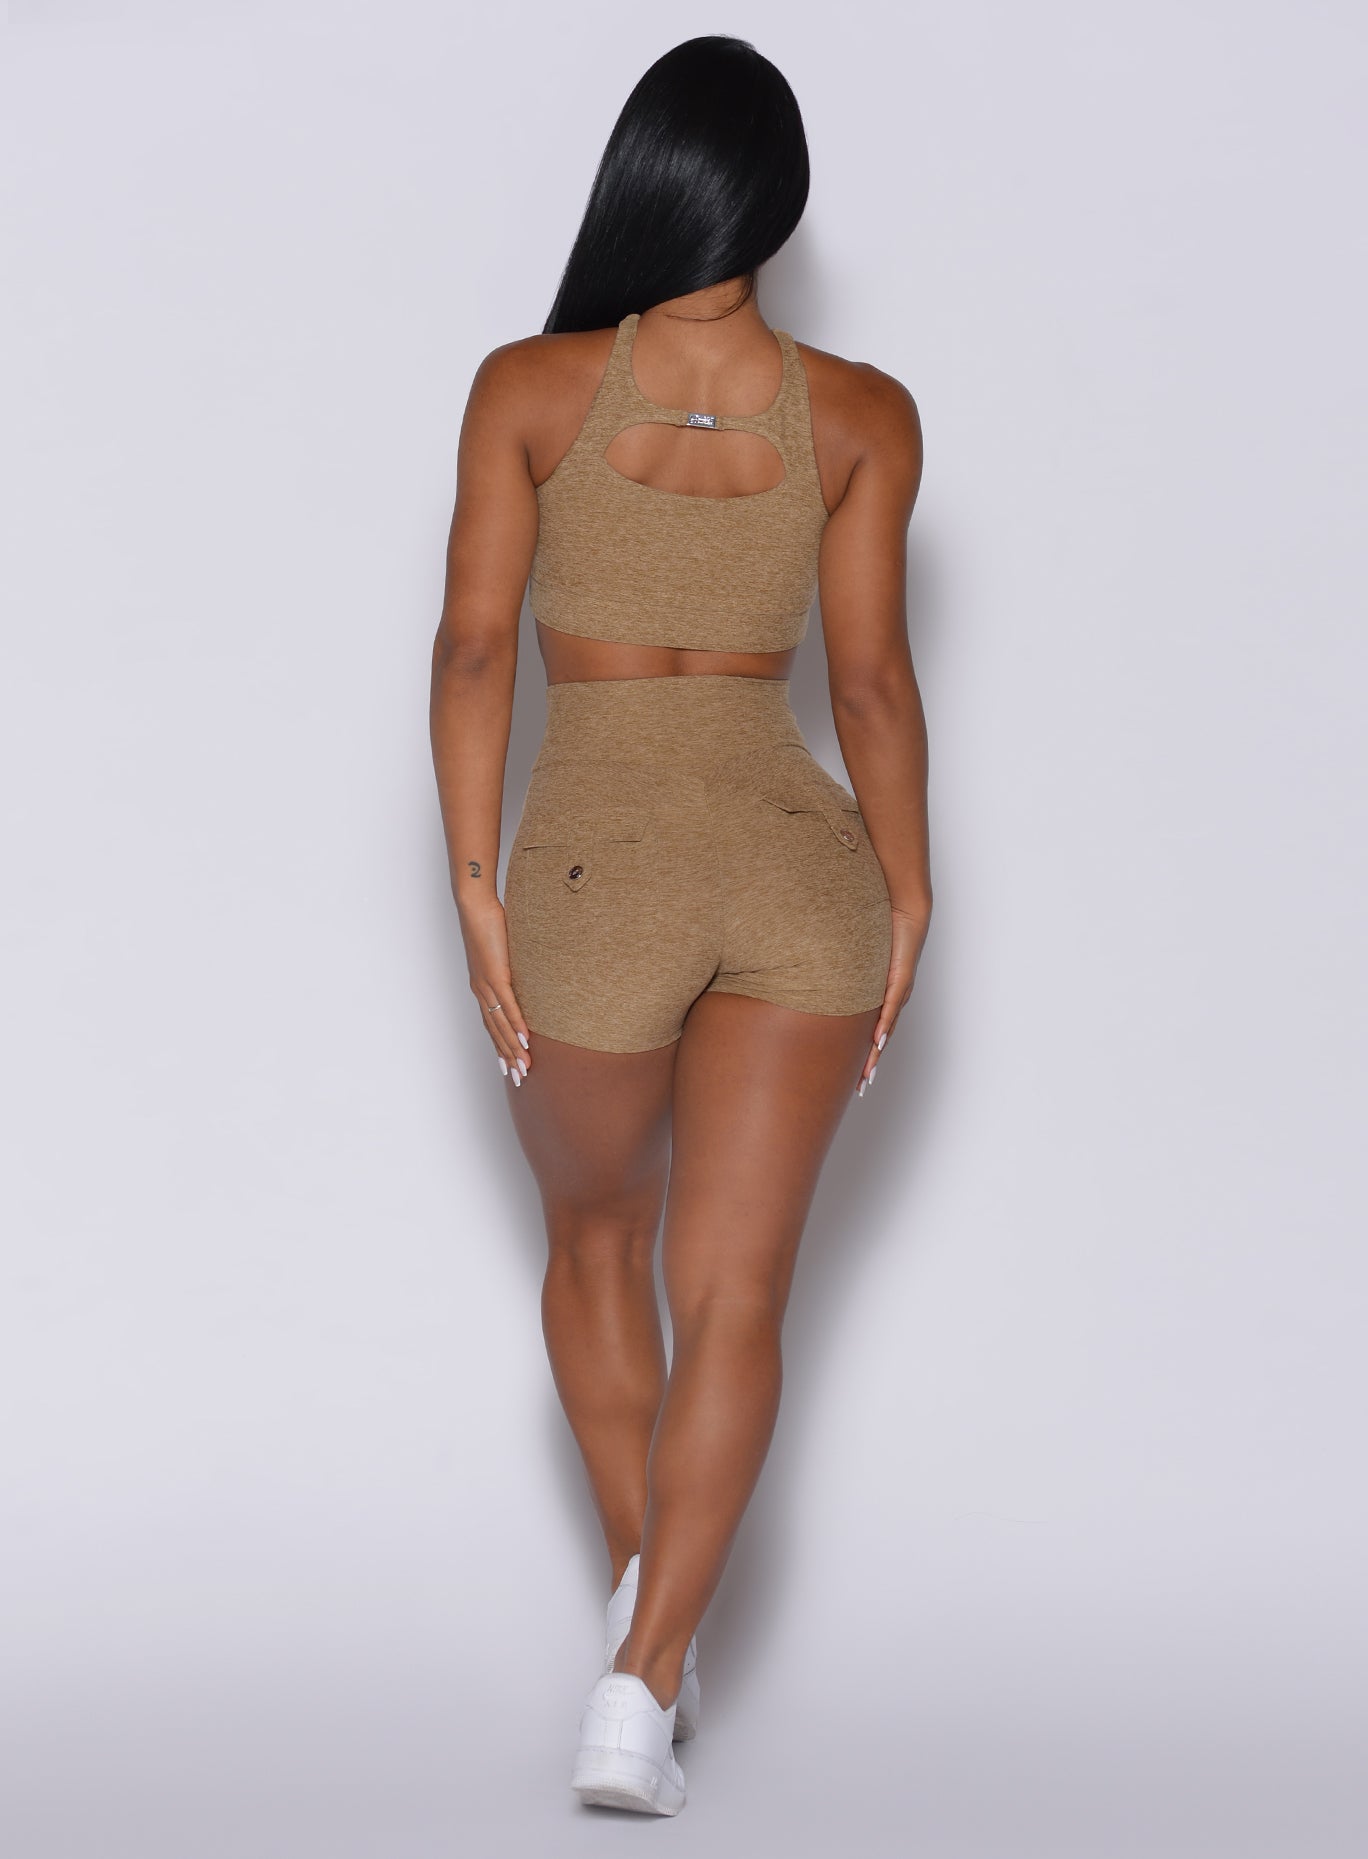 Back profile view of a model wearing our Pocket Pop Shorts and a sports bra in caramel color 